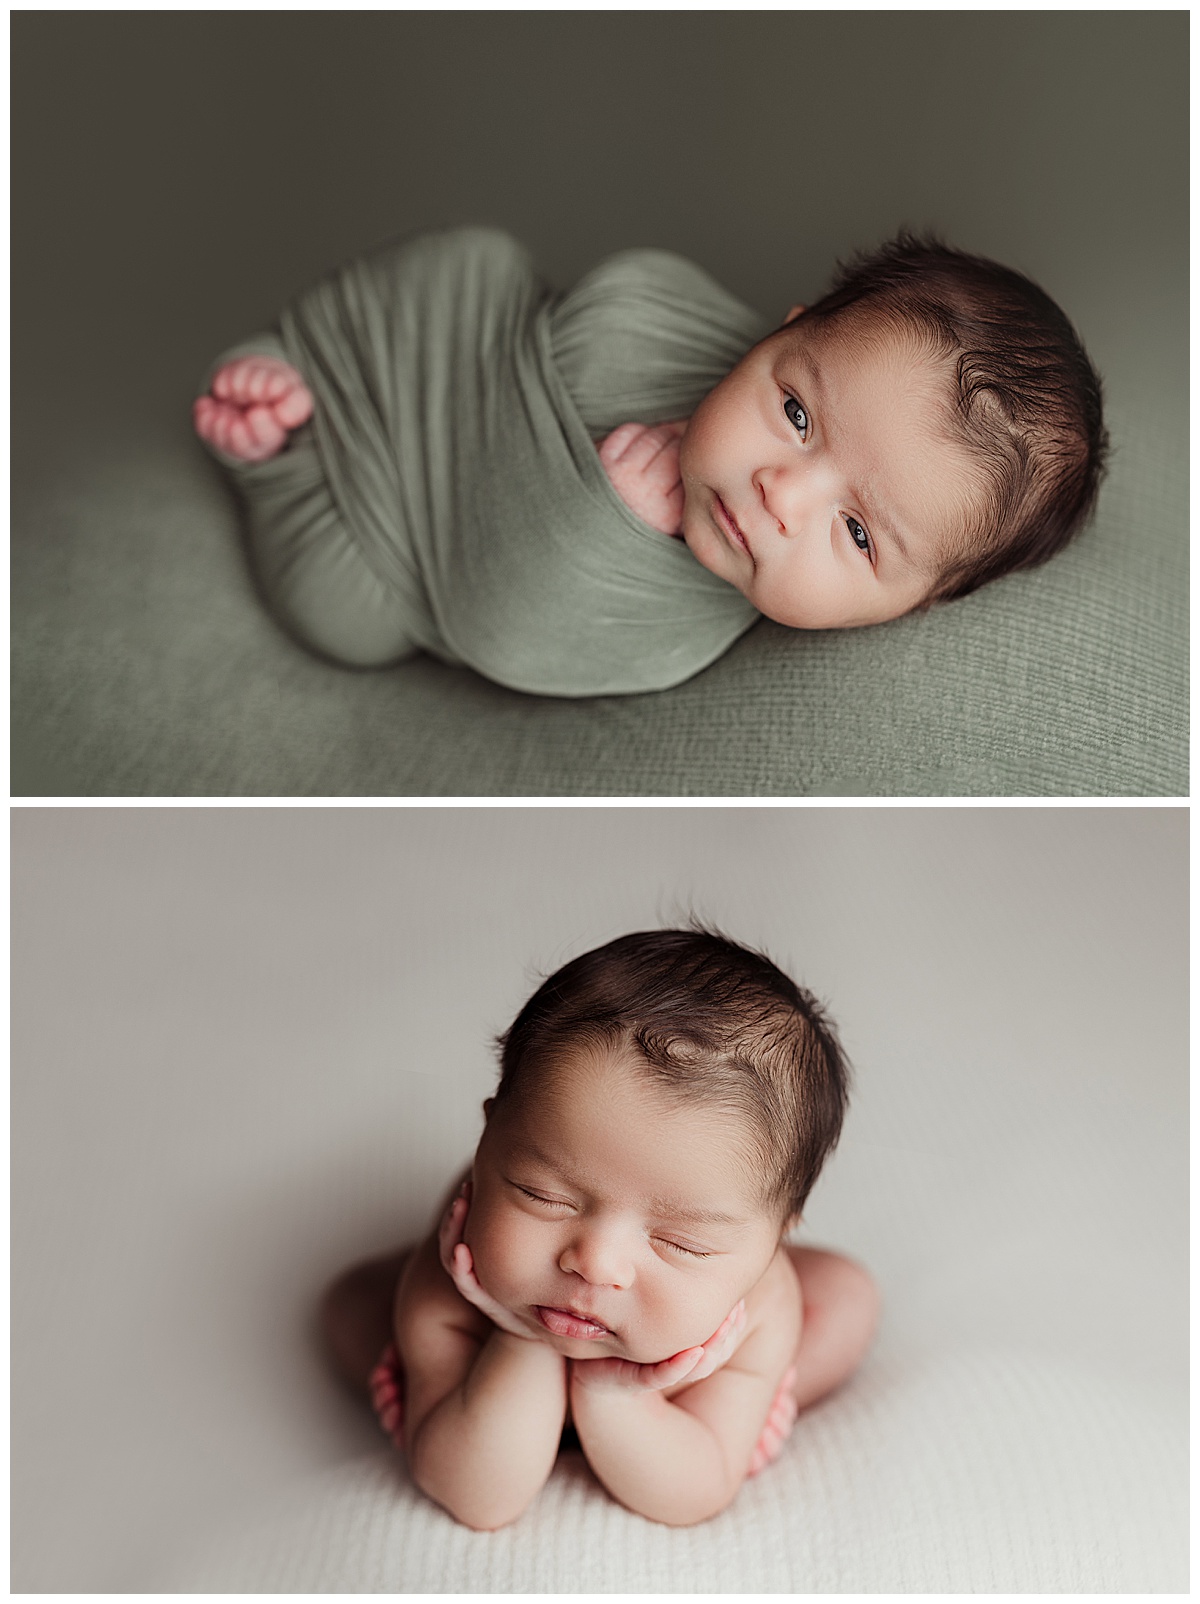 Baby wrapped in tight green and white swaddle for Norma Fayak Photography